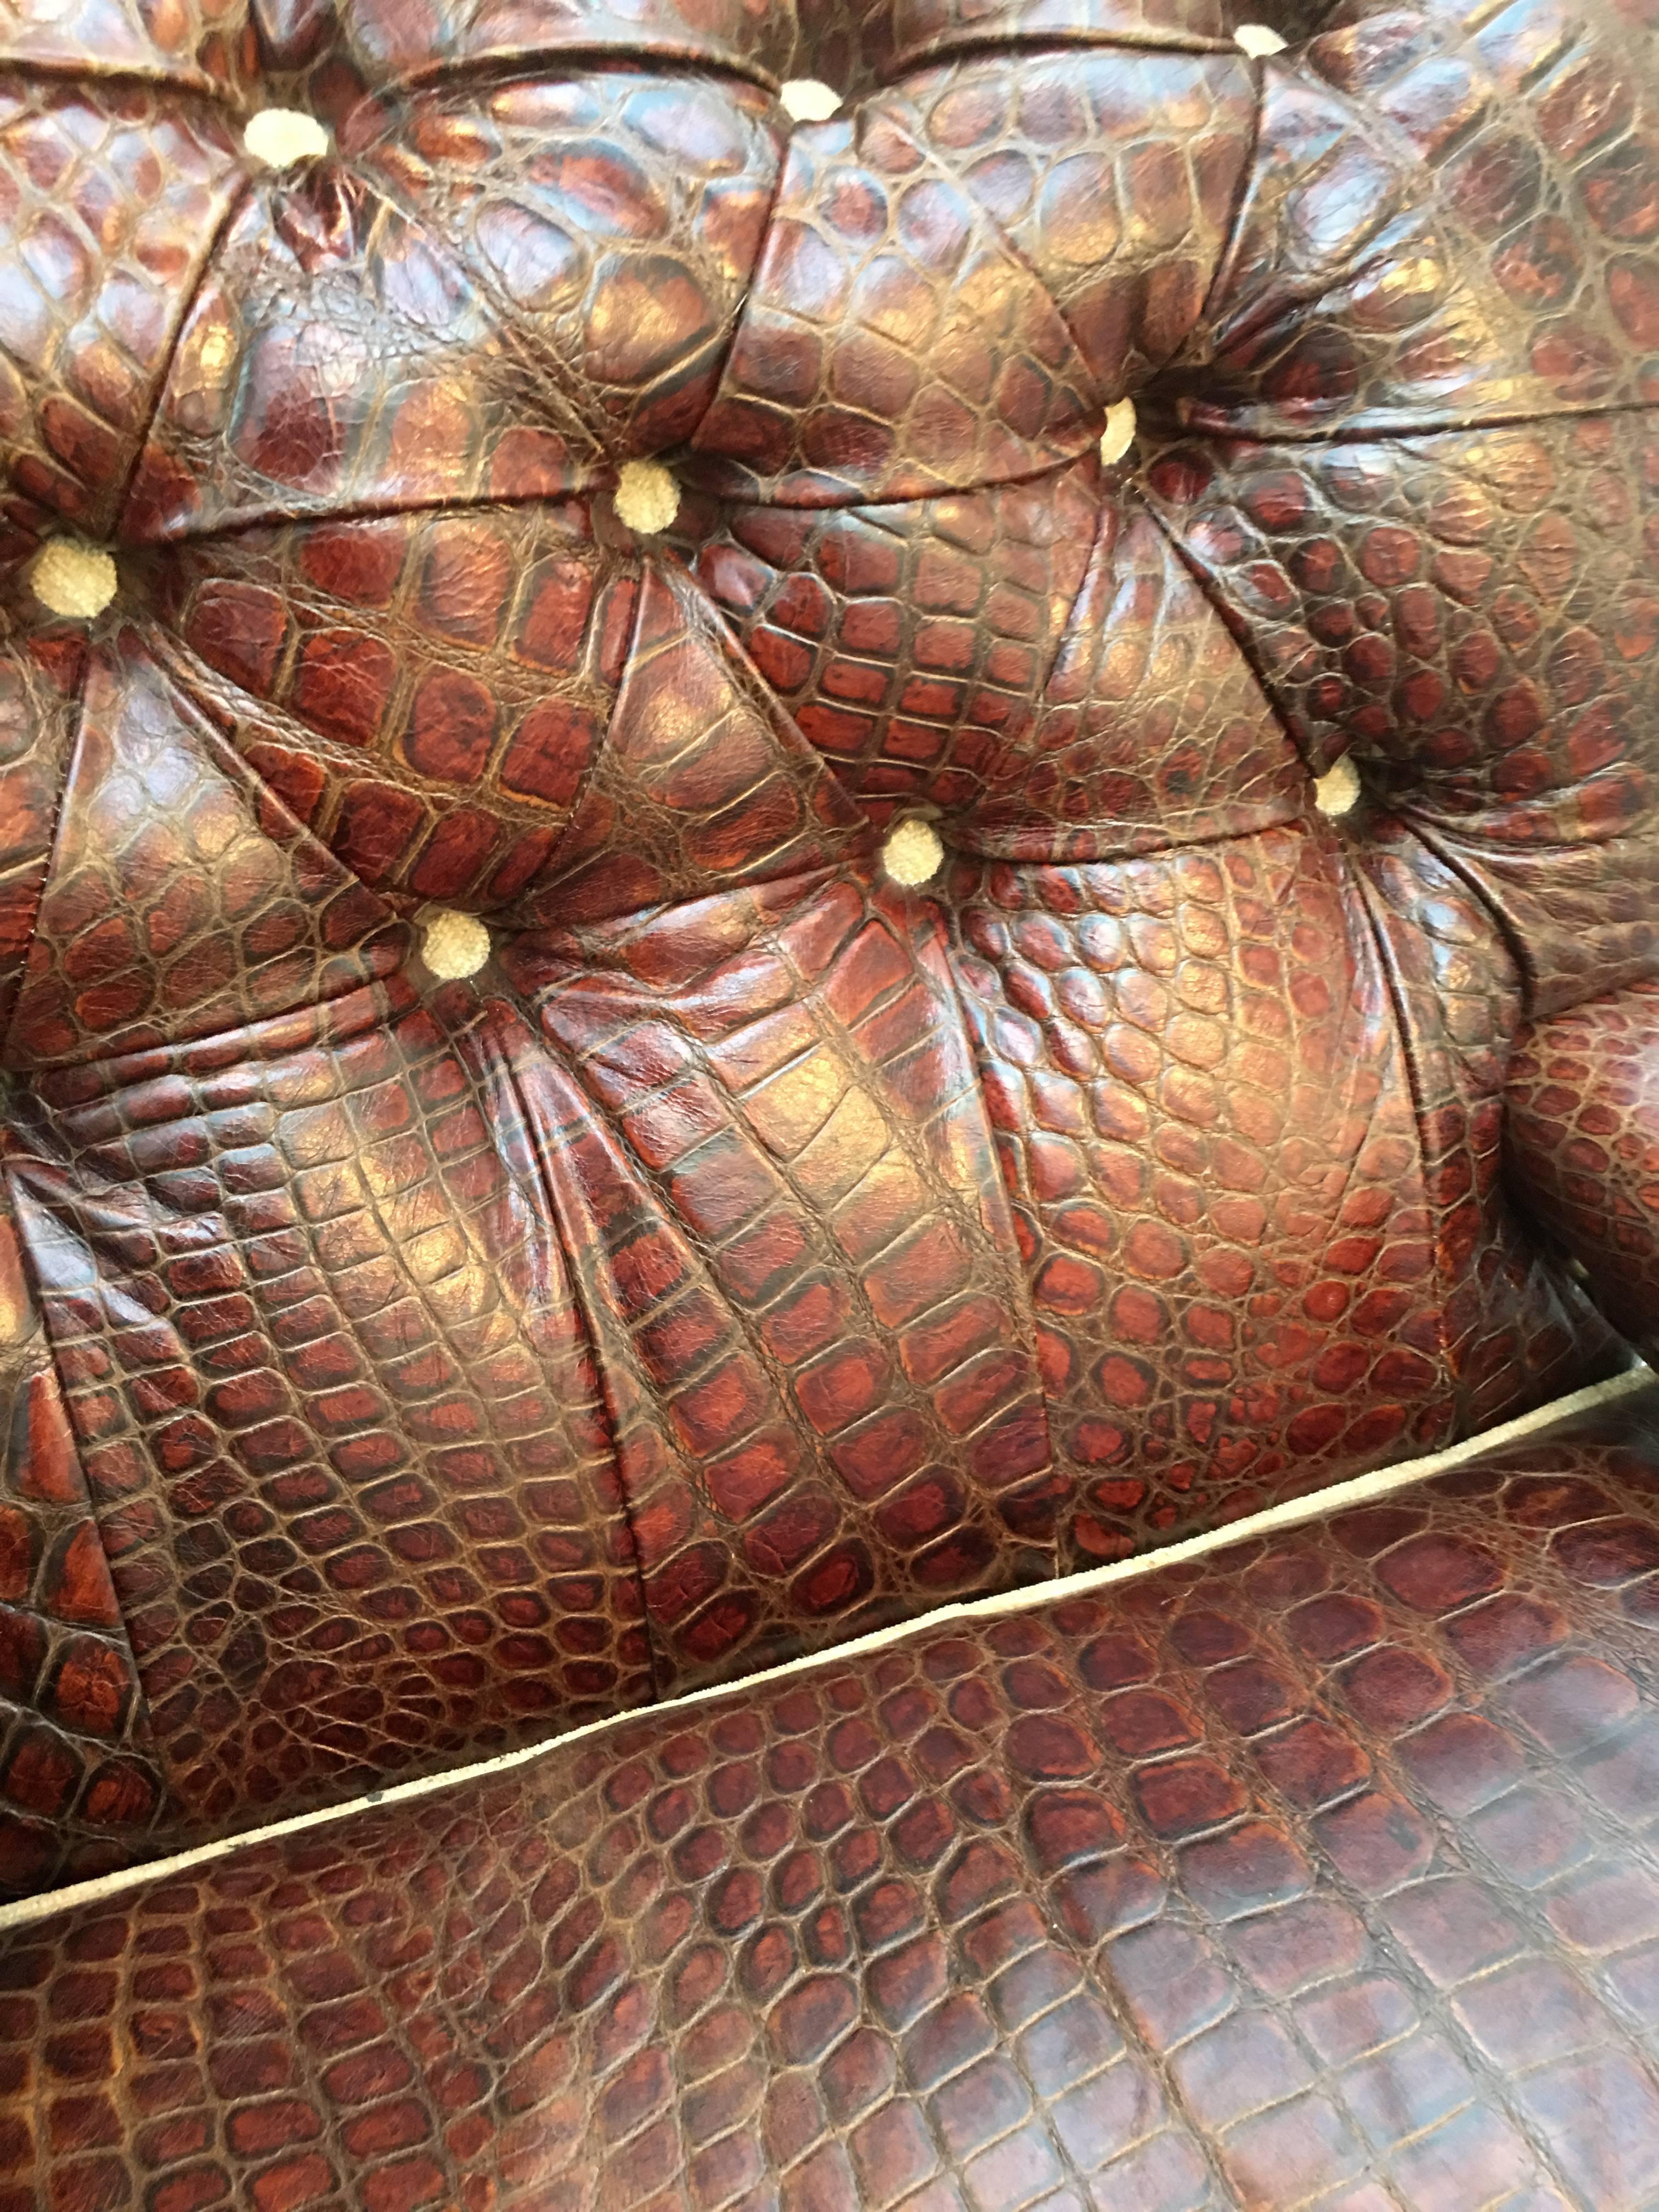 The only chair of its s kind in the world.

A handmade crocodile embossed leather and mahogany armchair by 
Kingsley & Co.

History:
I commissioned this chair to be made in 2002. At the time, I owned a company specialising in restoring antique